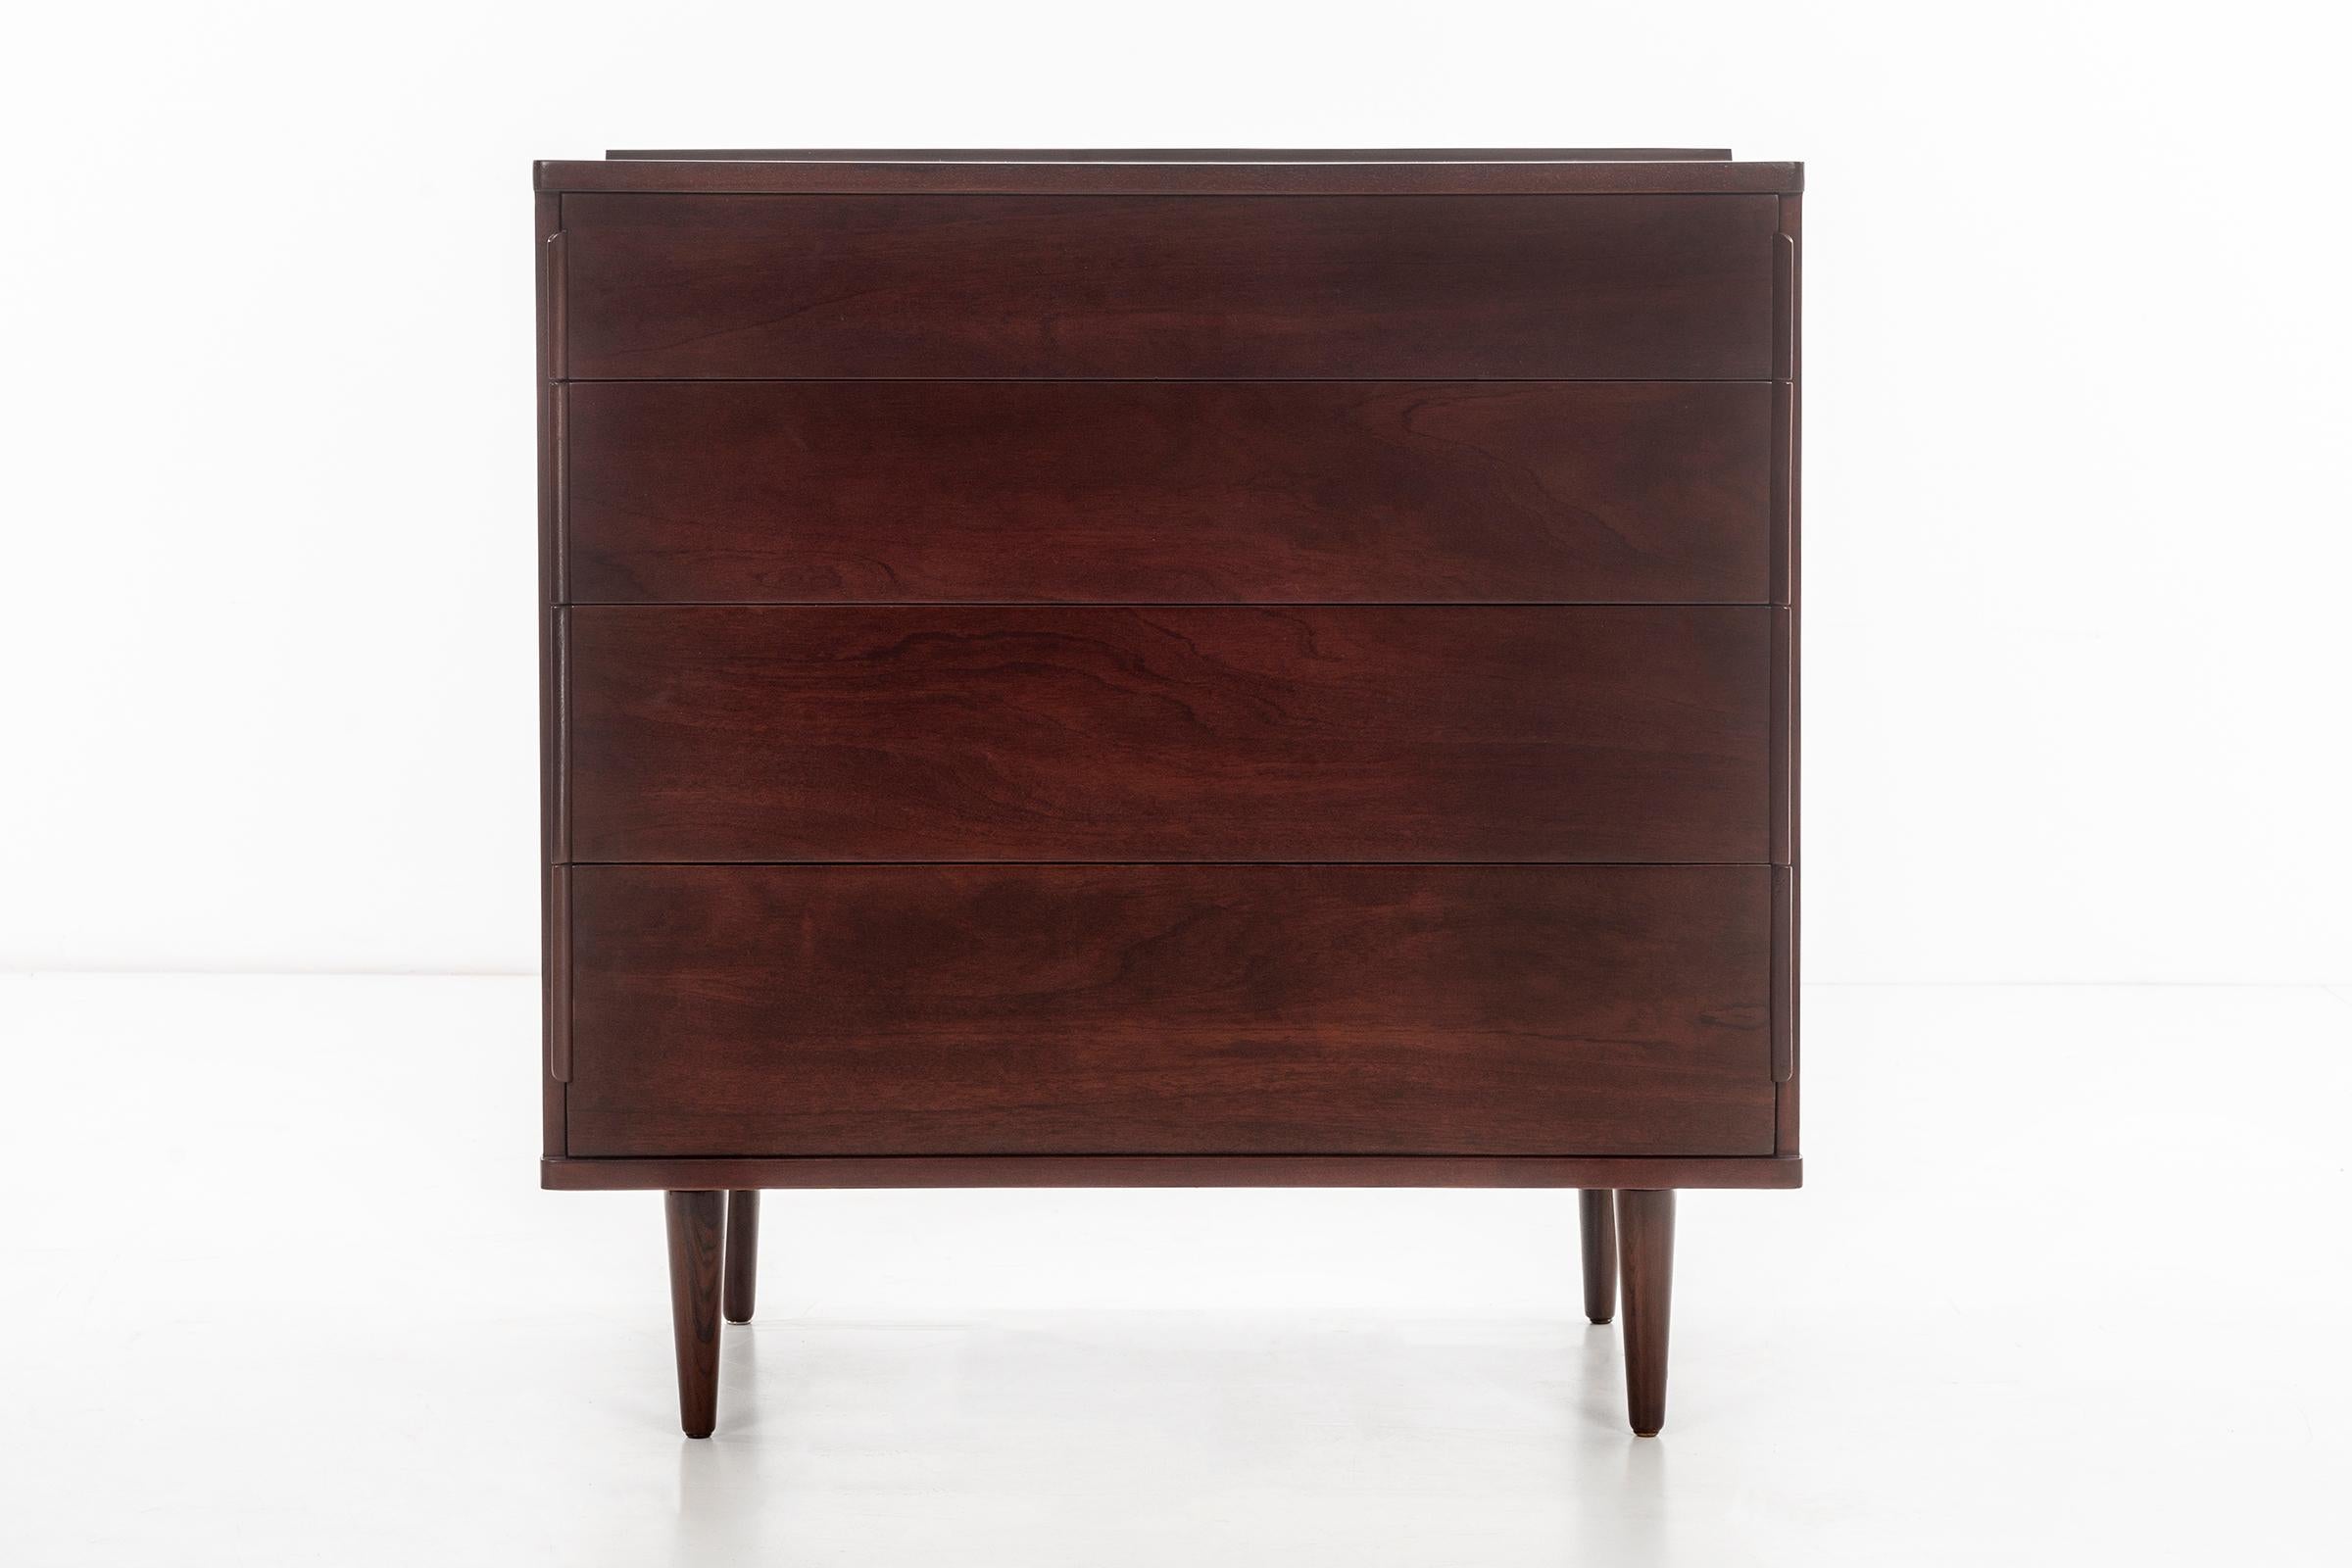 Mid-20th Century Pair of Dressers by Edward Wormley for Dunbar